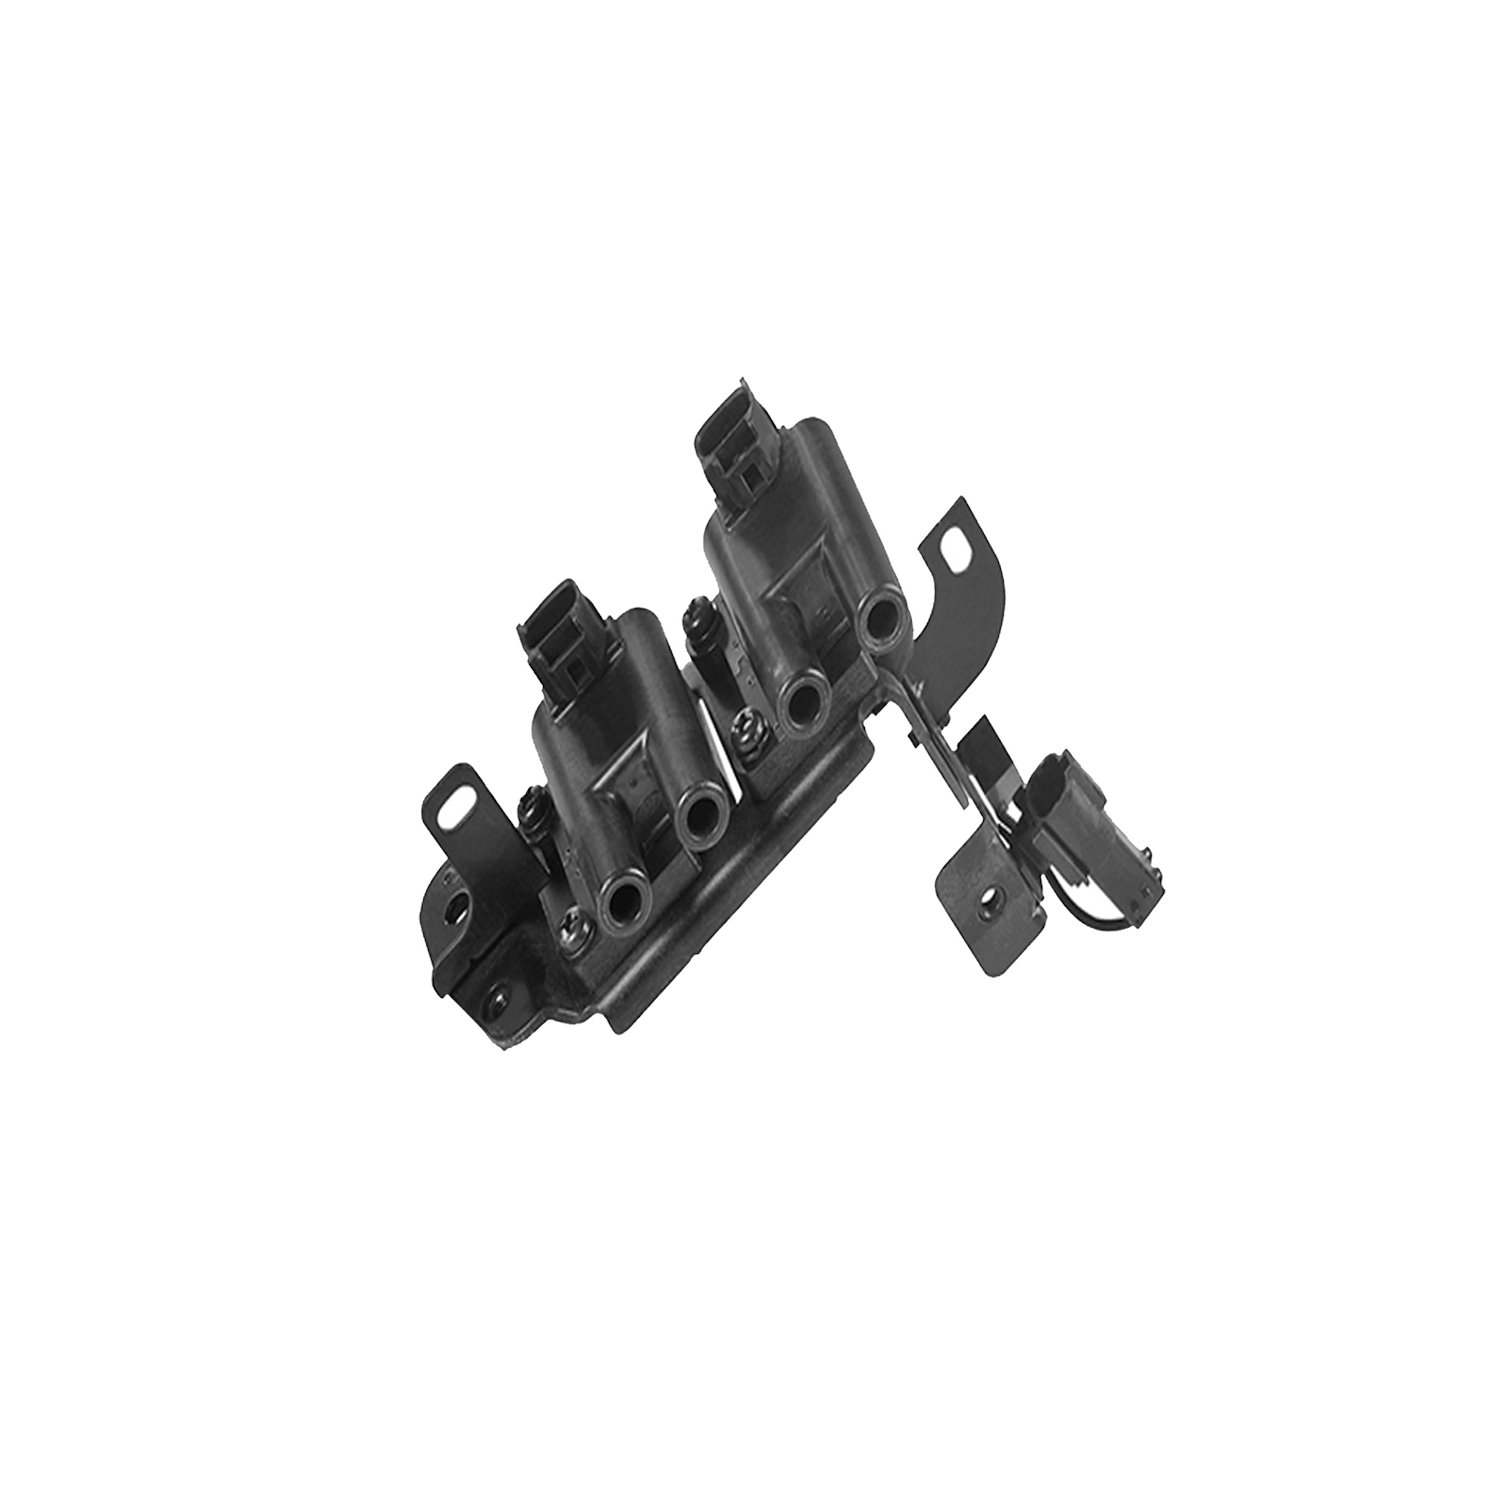 OE Replacement Ignition Coil for 2001-2005 Hyundai Accent 1.6L